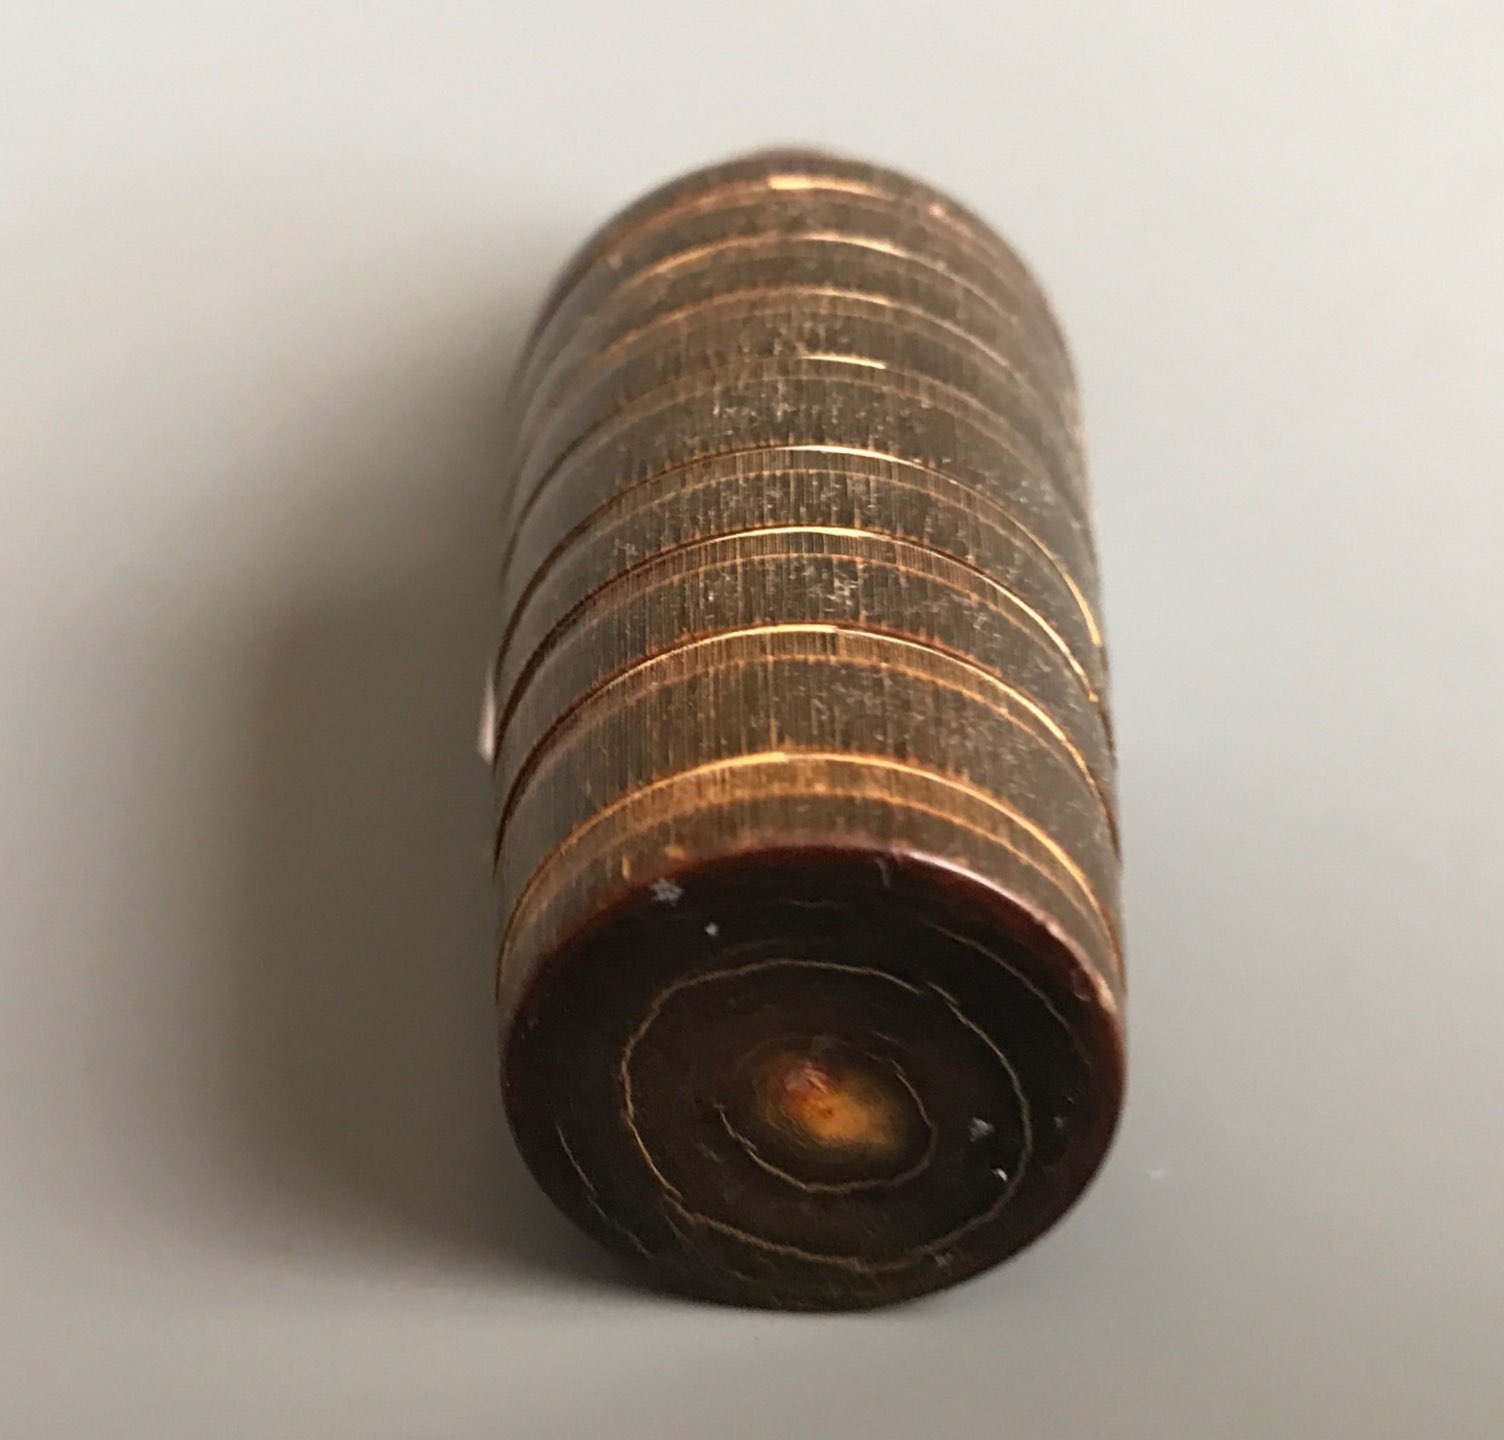 A ribbed turned cattle horn snuff bottle with original stopper typical of the type carried by - Image 3 of 3